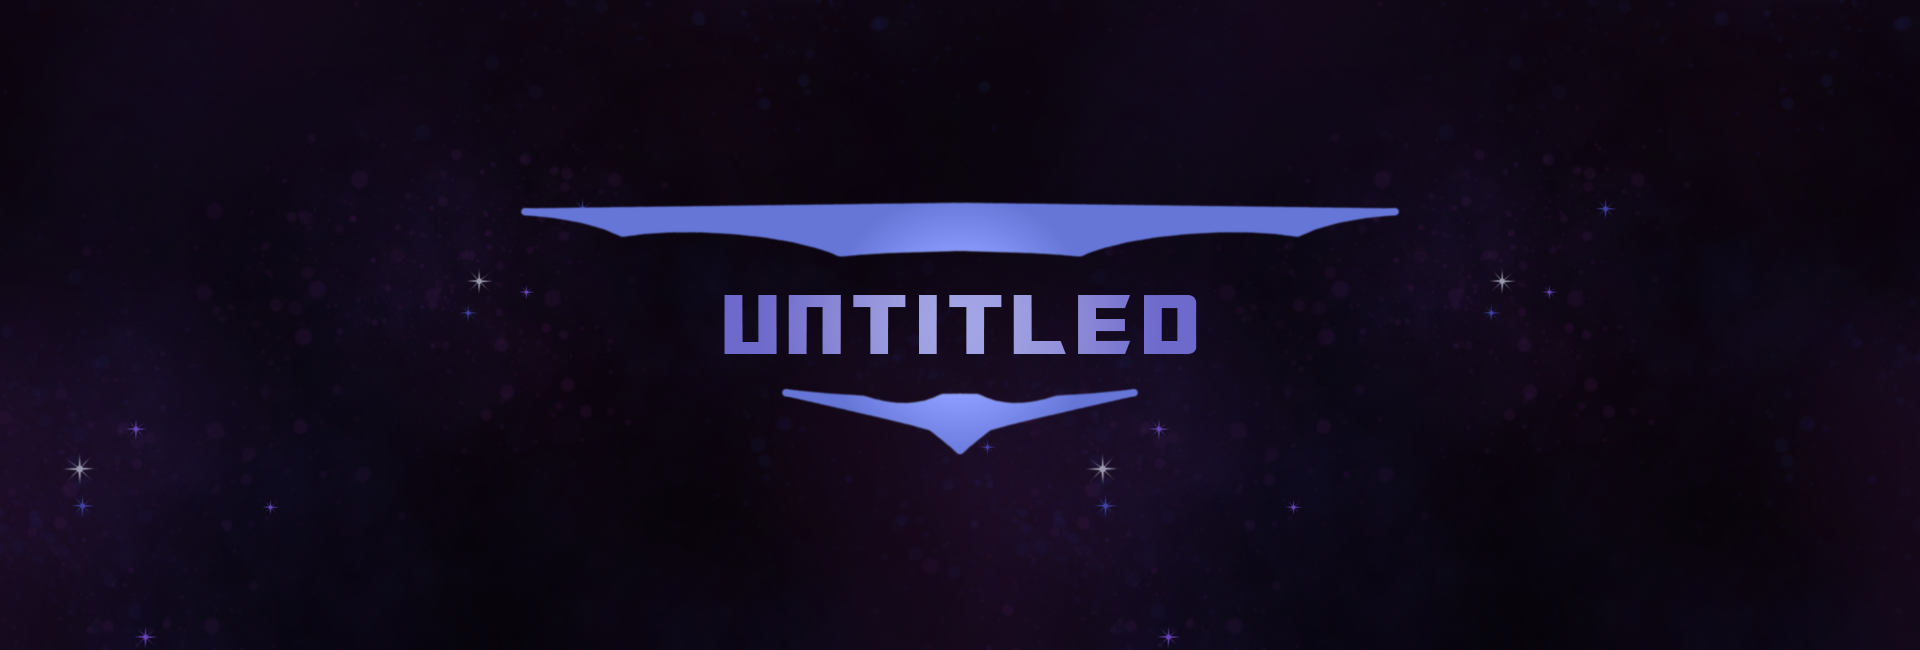 Untitled Space Shooter